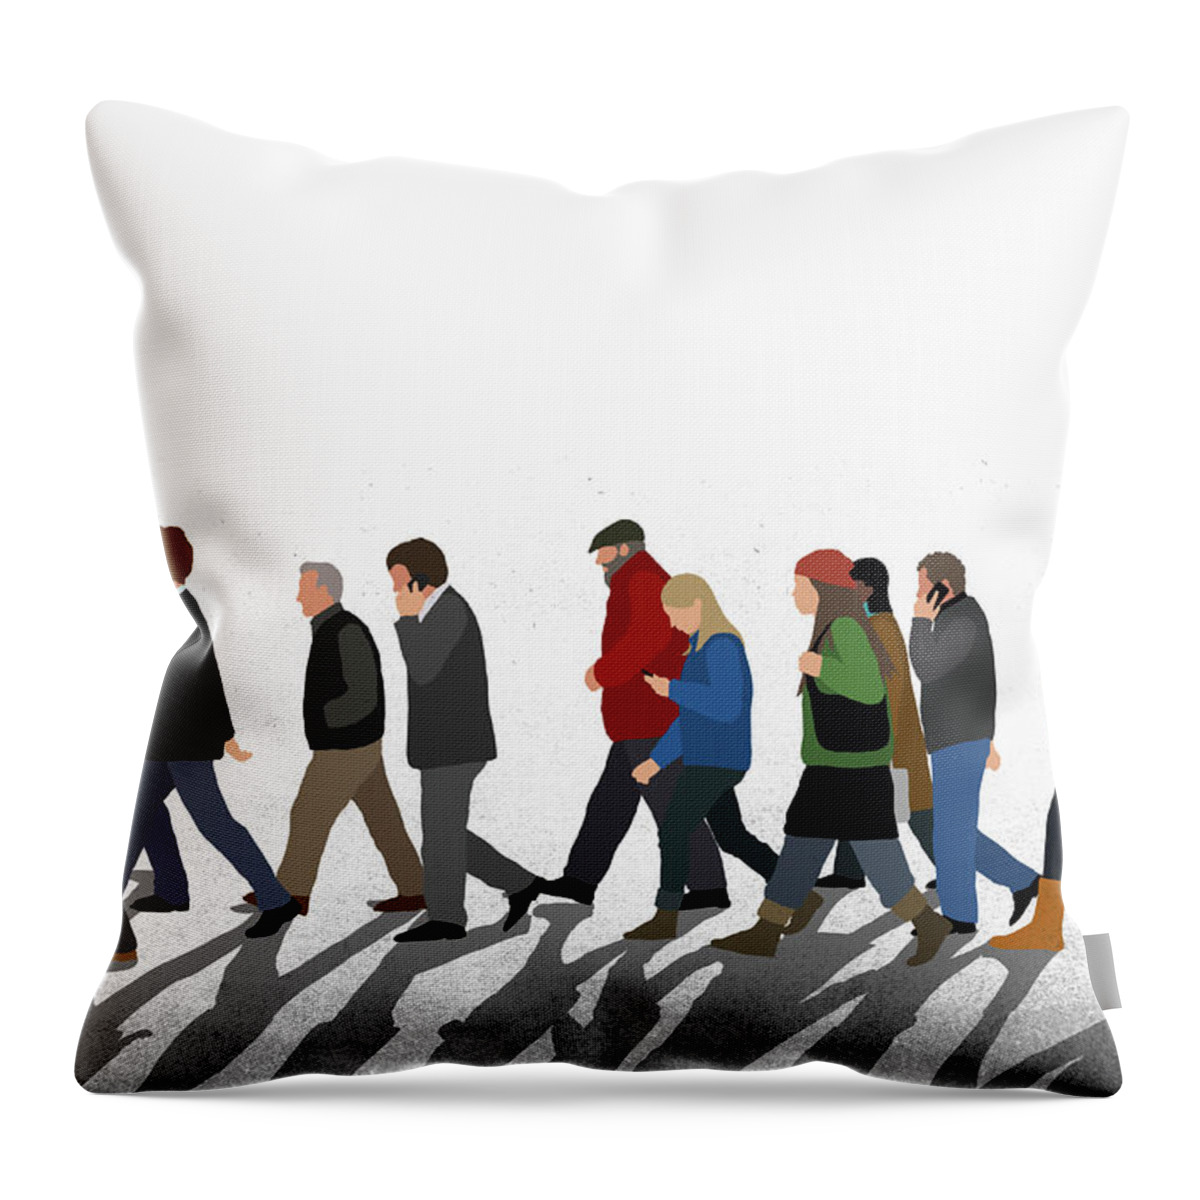 Shadow Throw Pillow featuring the digital art Illustration Of People Walking On by Malte Mueller